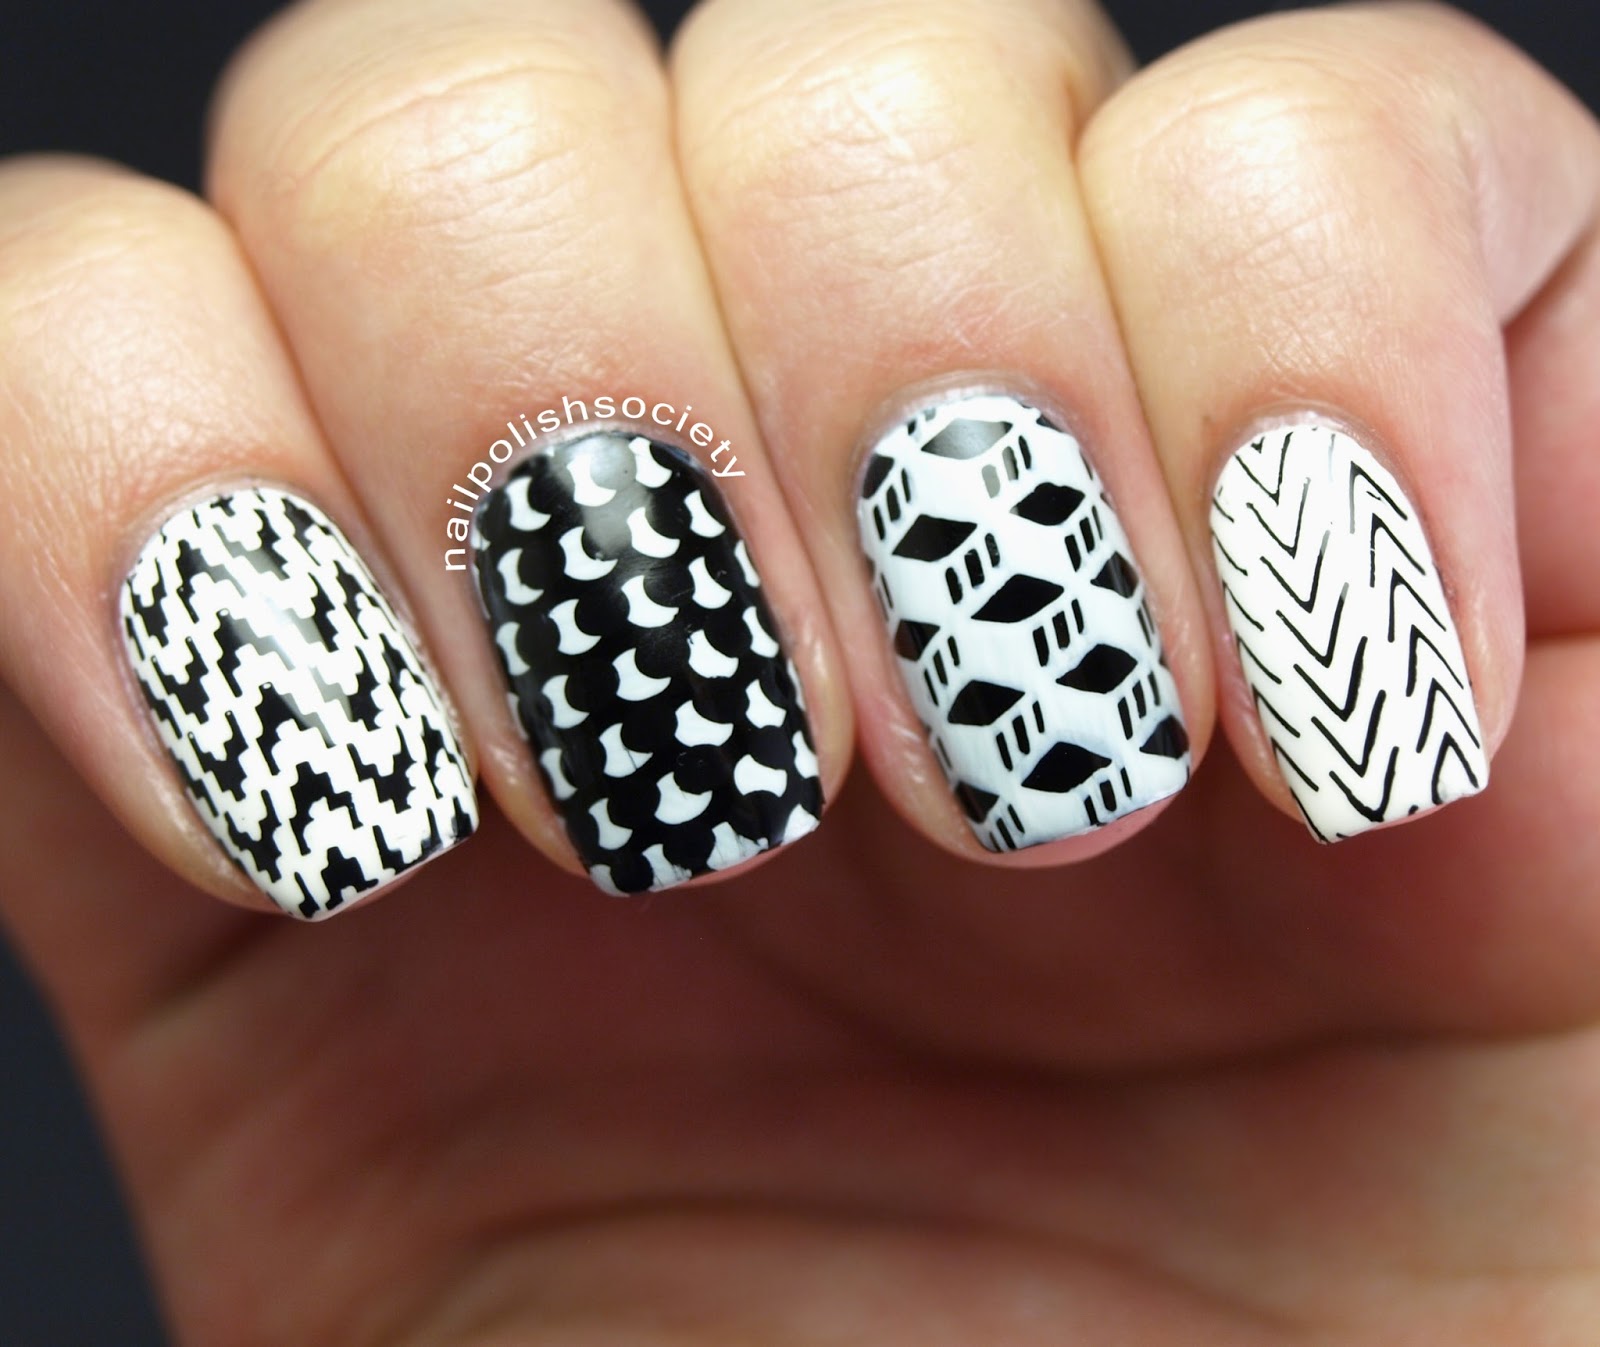 Nail Polish Society: 31DC2014 Day 07: Black and White and Stamped All Over